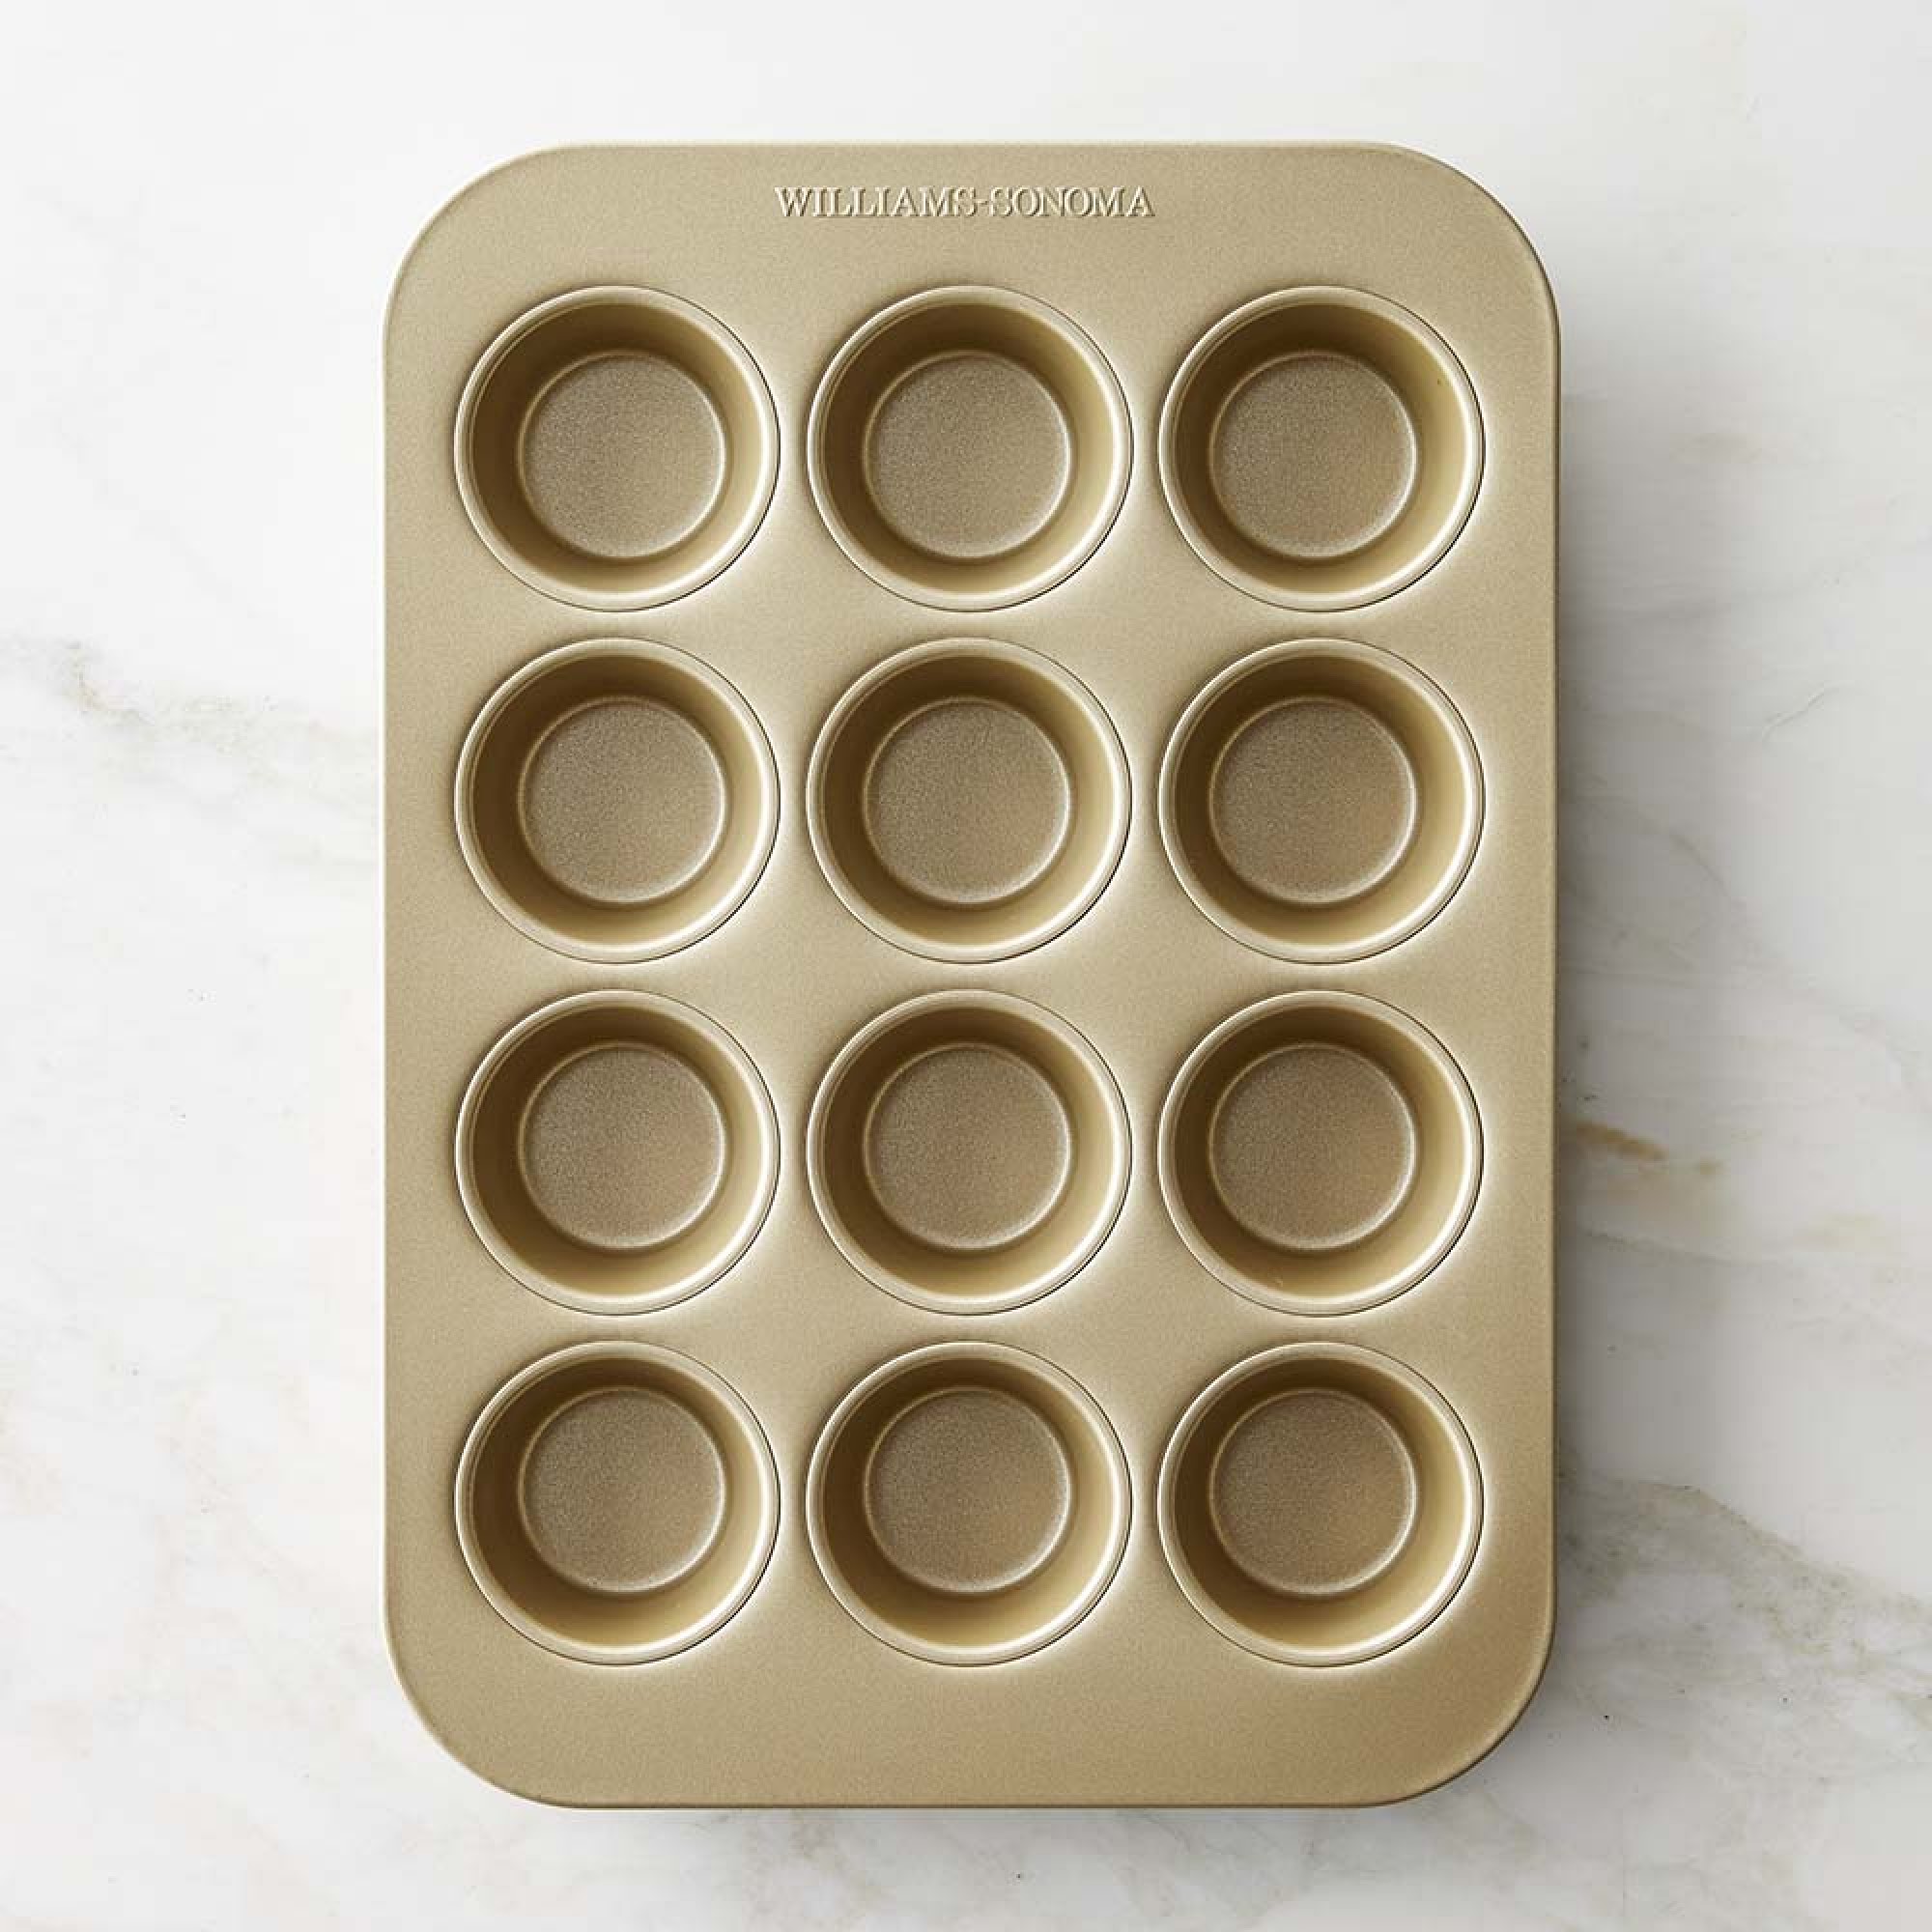 Williams Sonoma Goldtouch® Pro Nonstick Muffin Pan